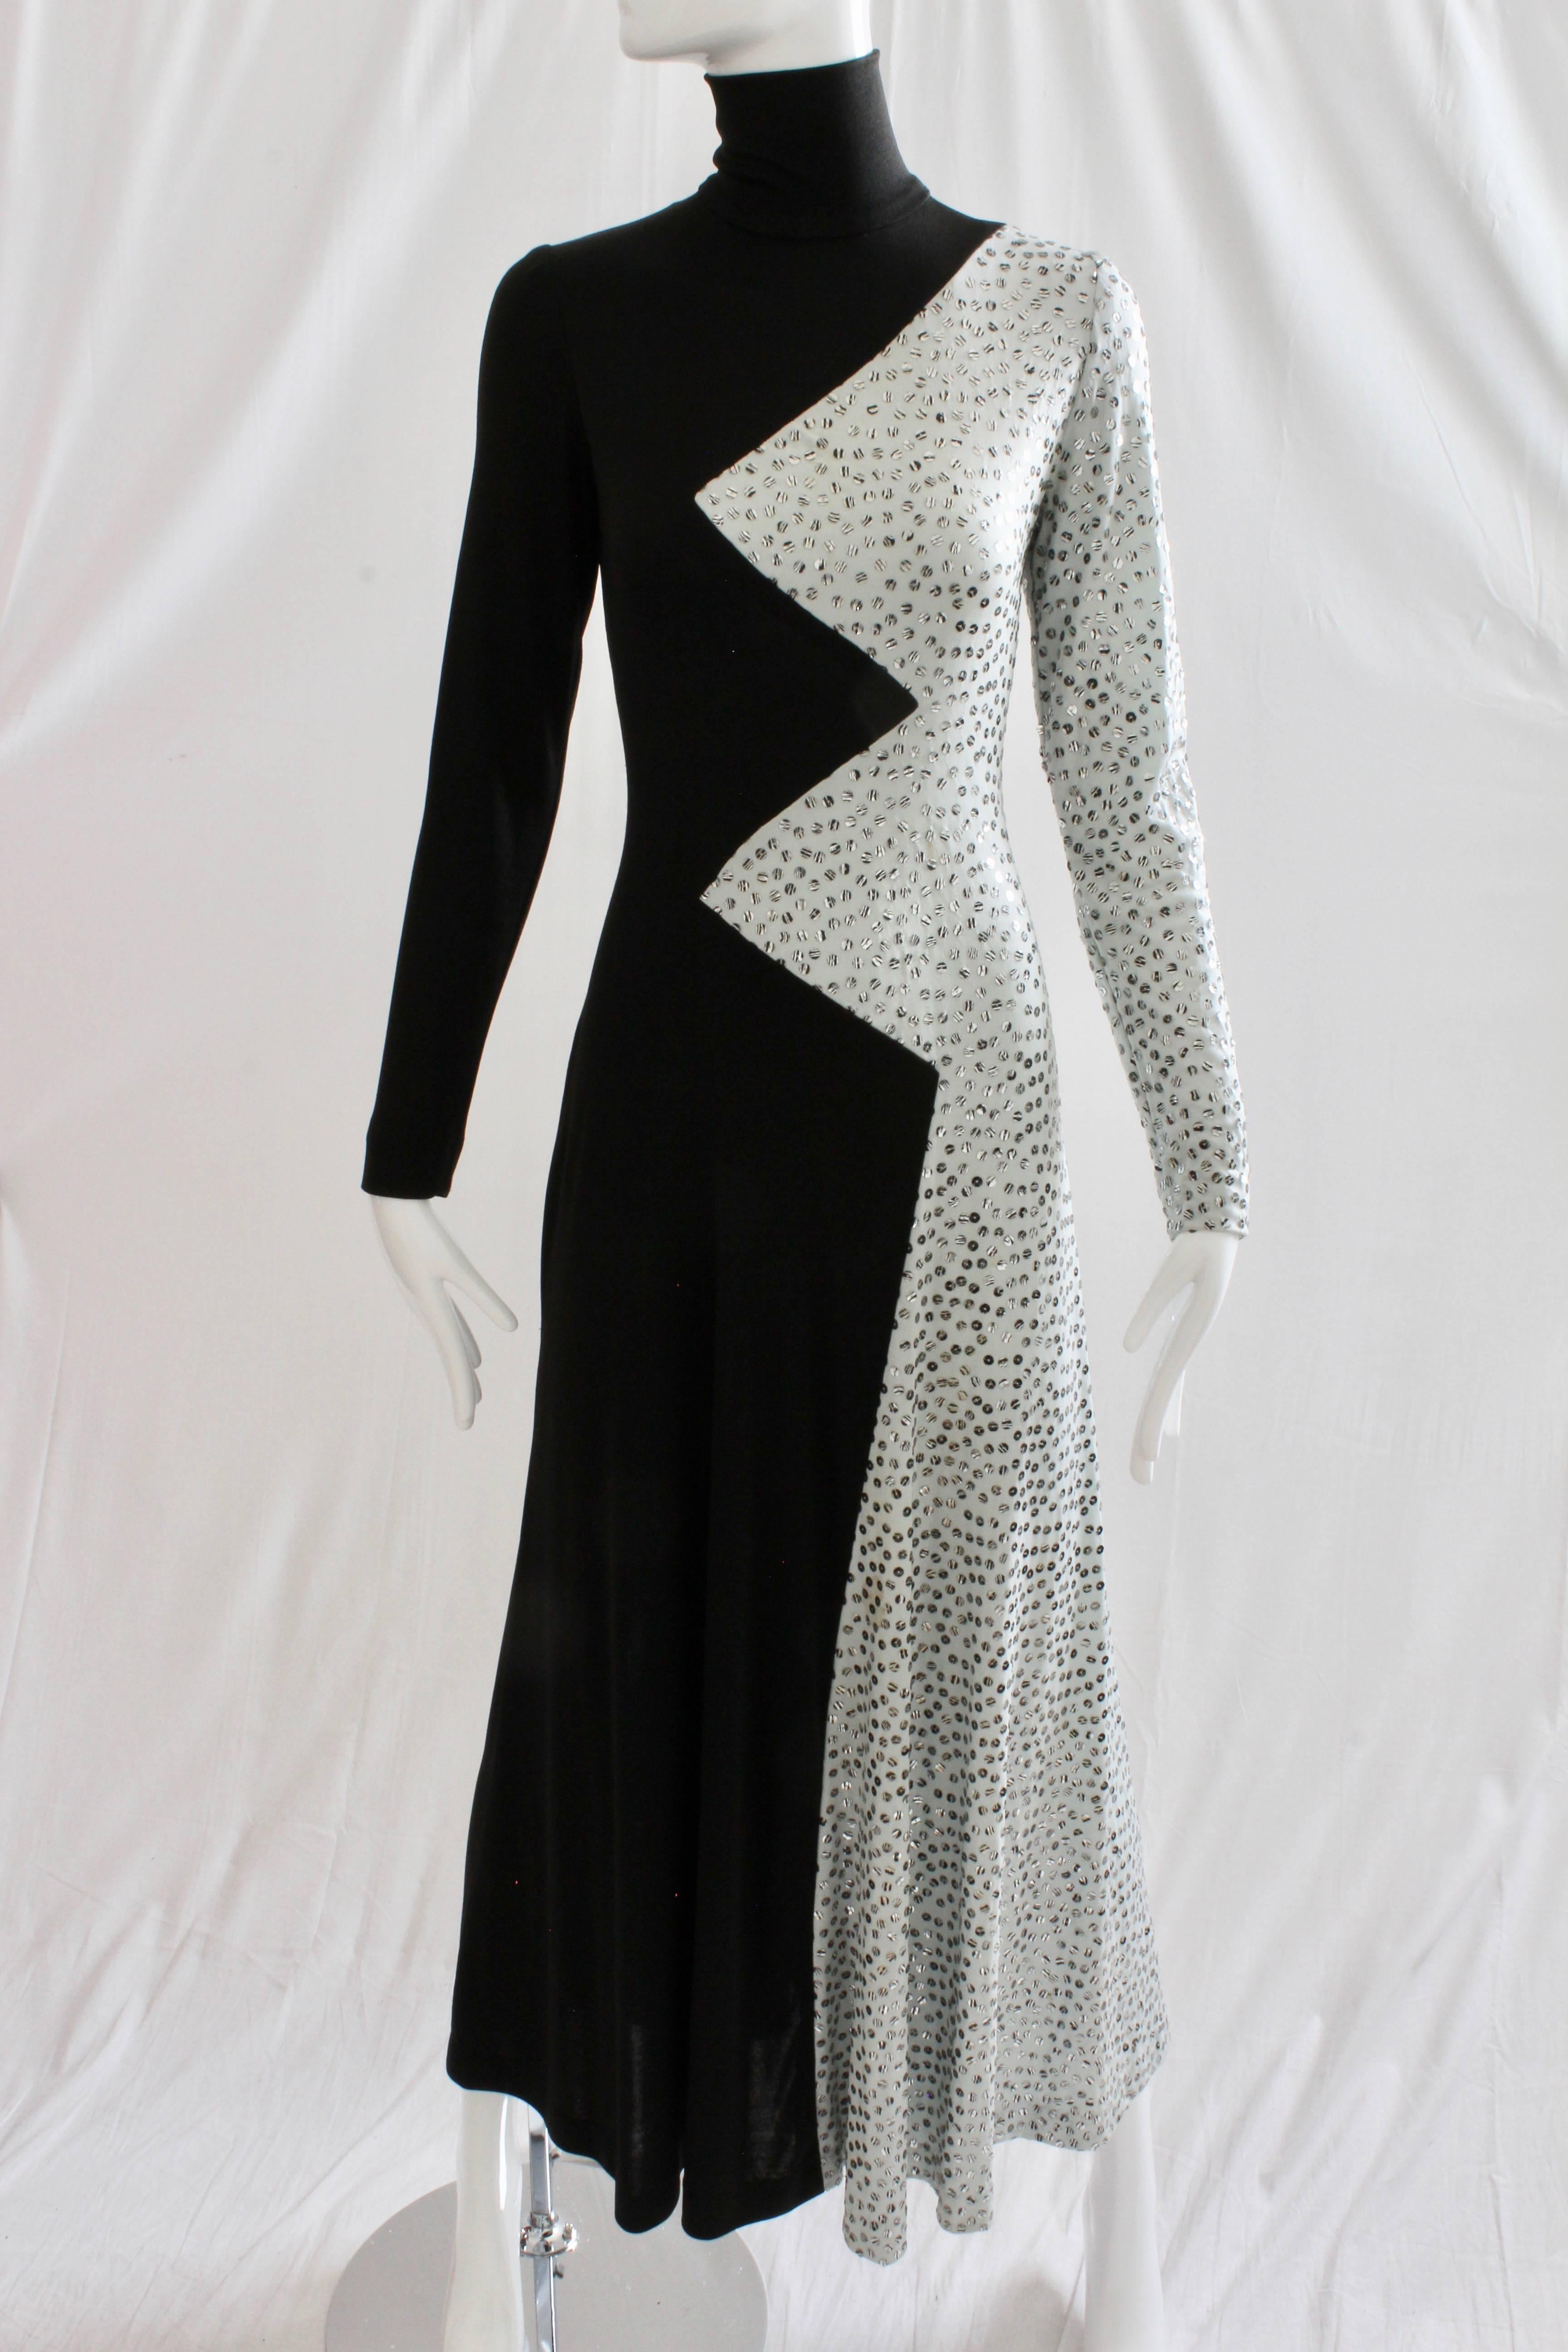 Yolanda Cellucci Black and Gray Maxi Dress Evening Gown, 1970s In Good Condition In Port Saint Lucie, FL